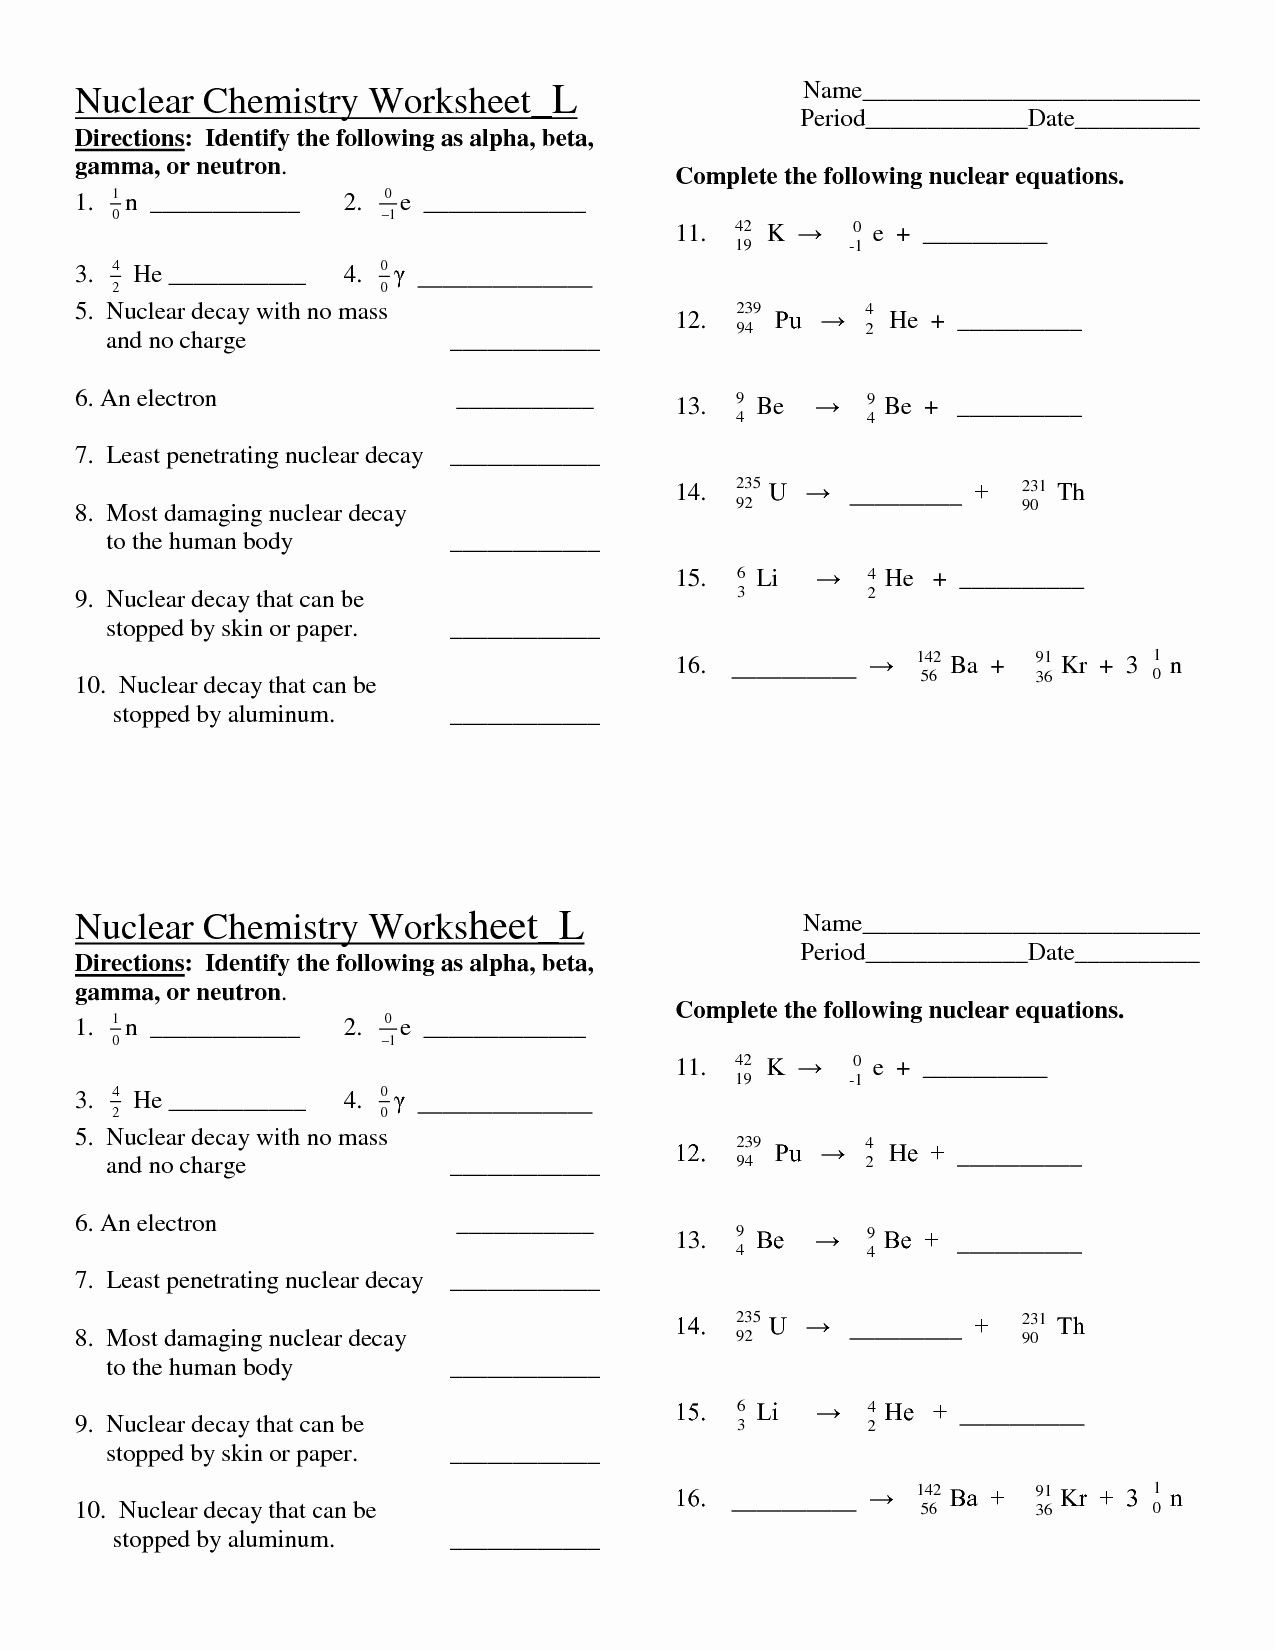 Nuclear Decay Worksheet Answers 50 Nuclear Chemistry Worksheet Answer Key In 2020